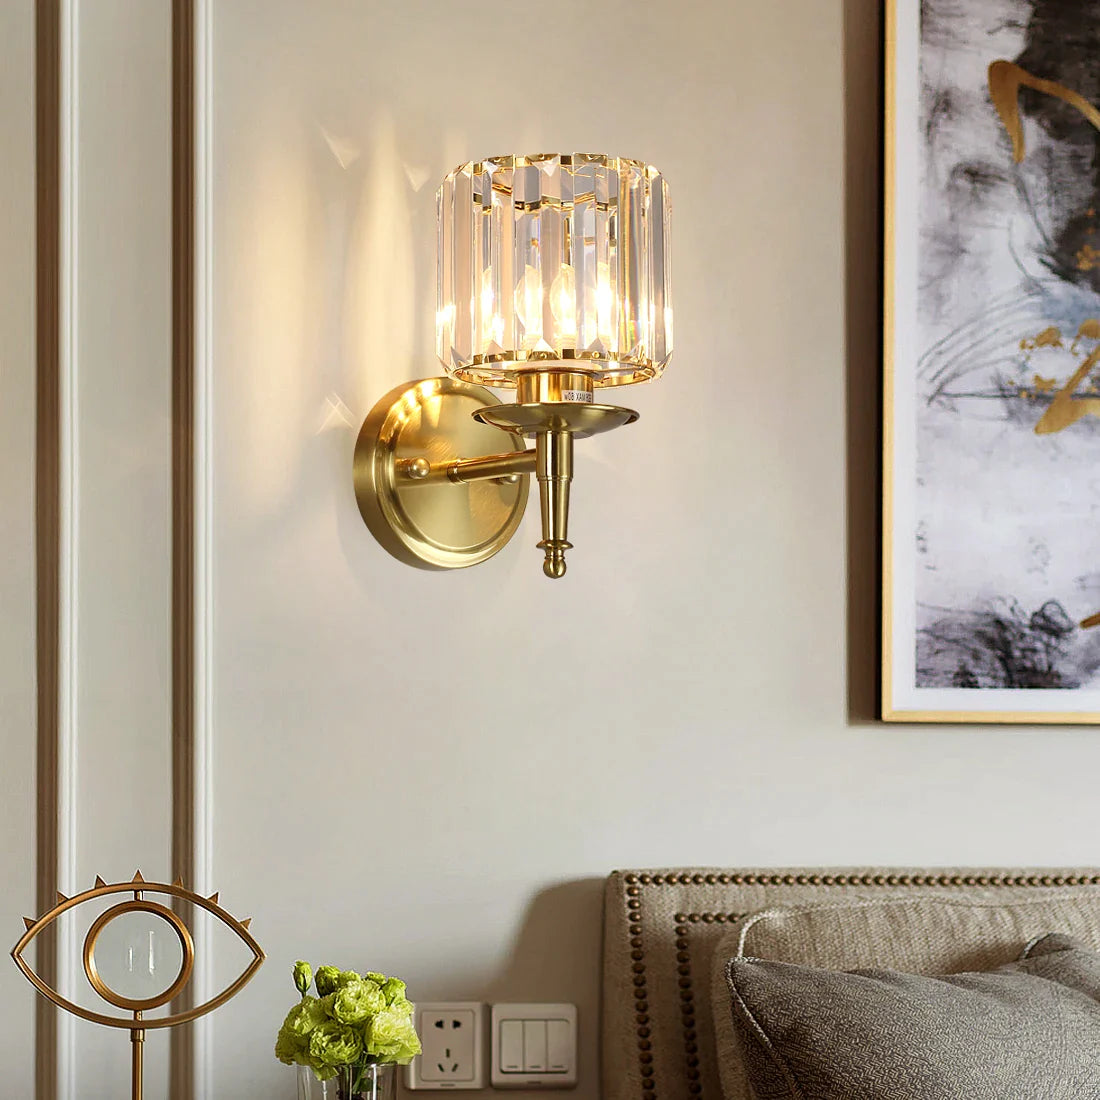 Crystal Wall Sconces: Adding Sparkle to Your Home